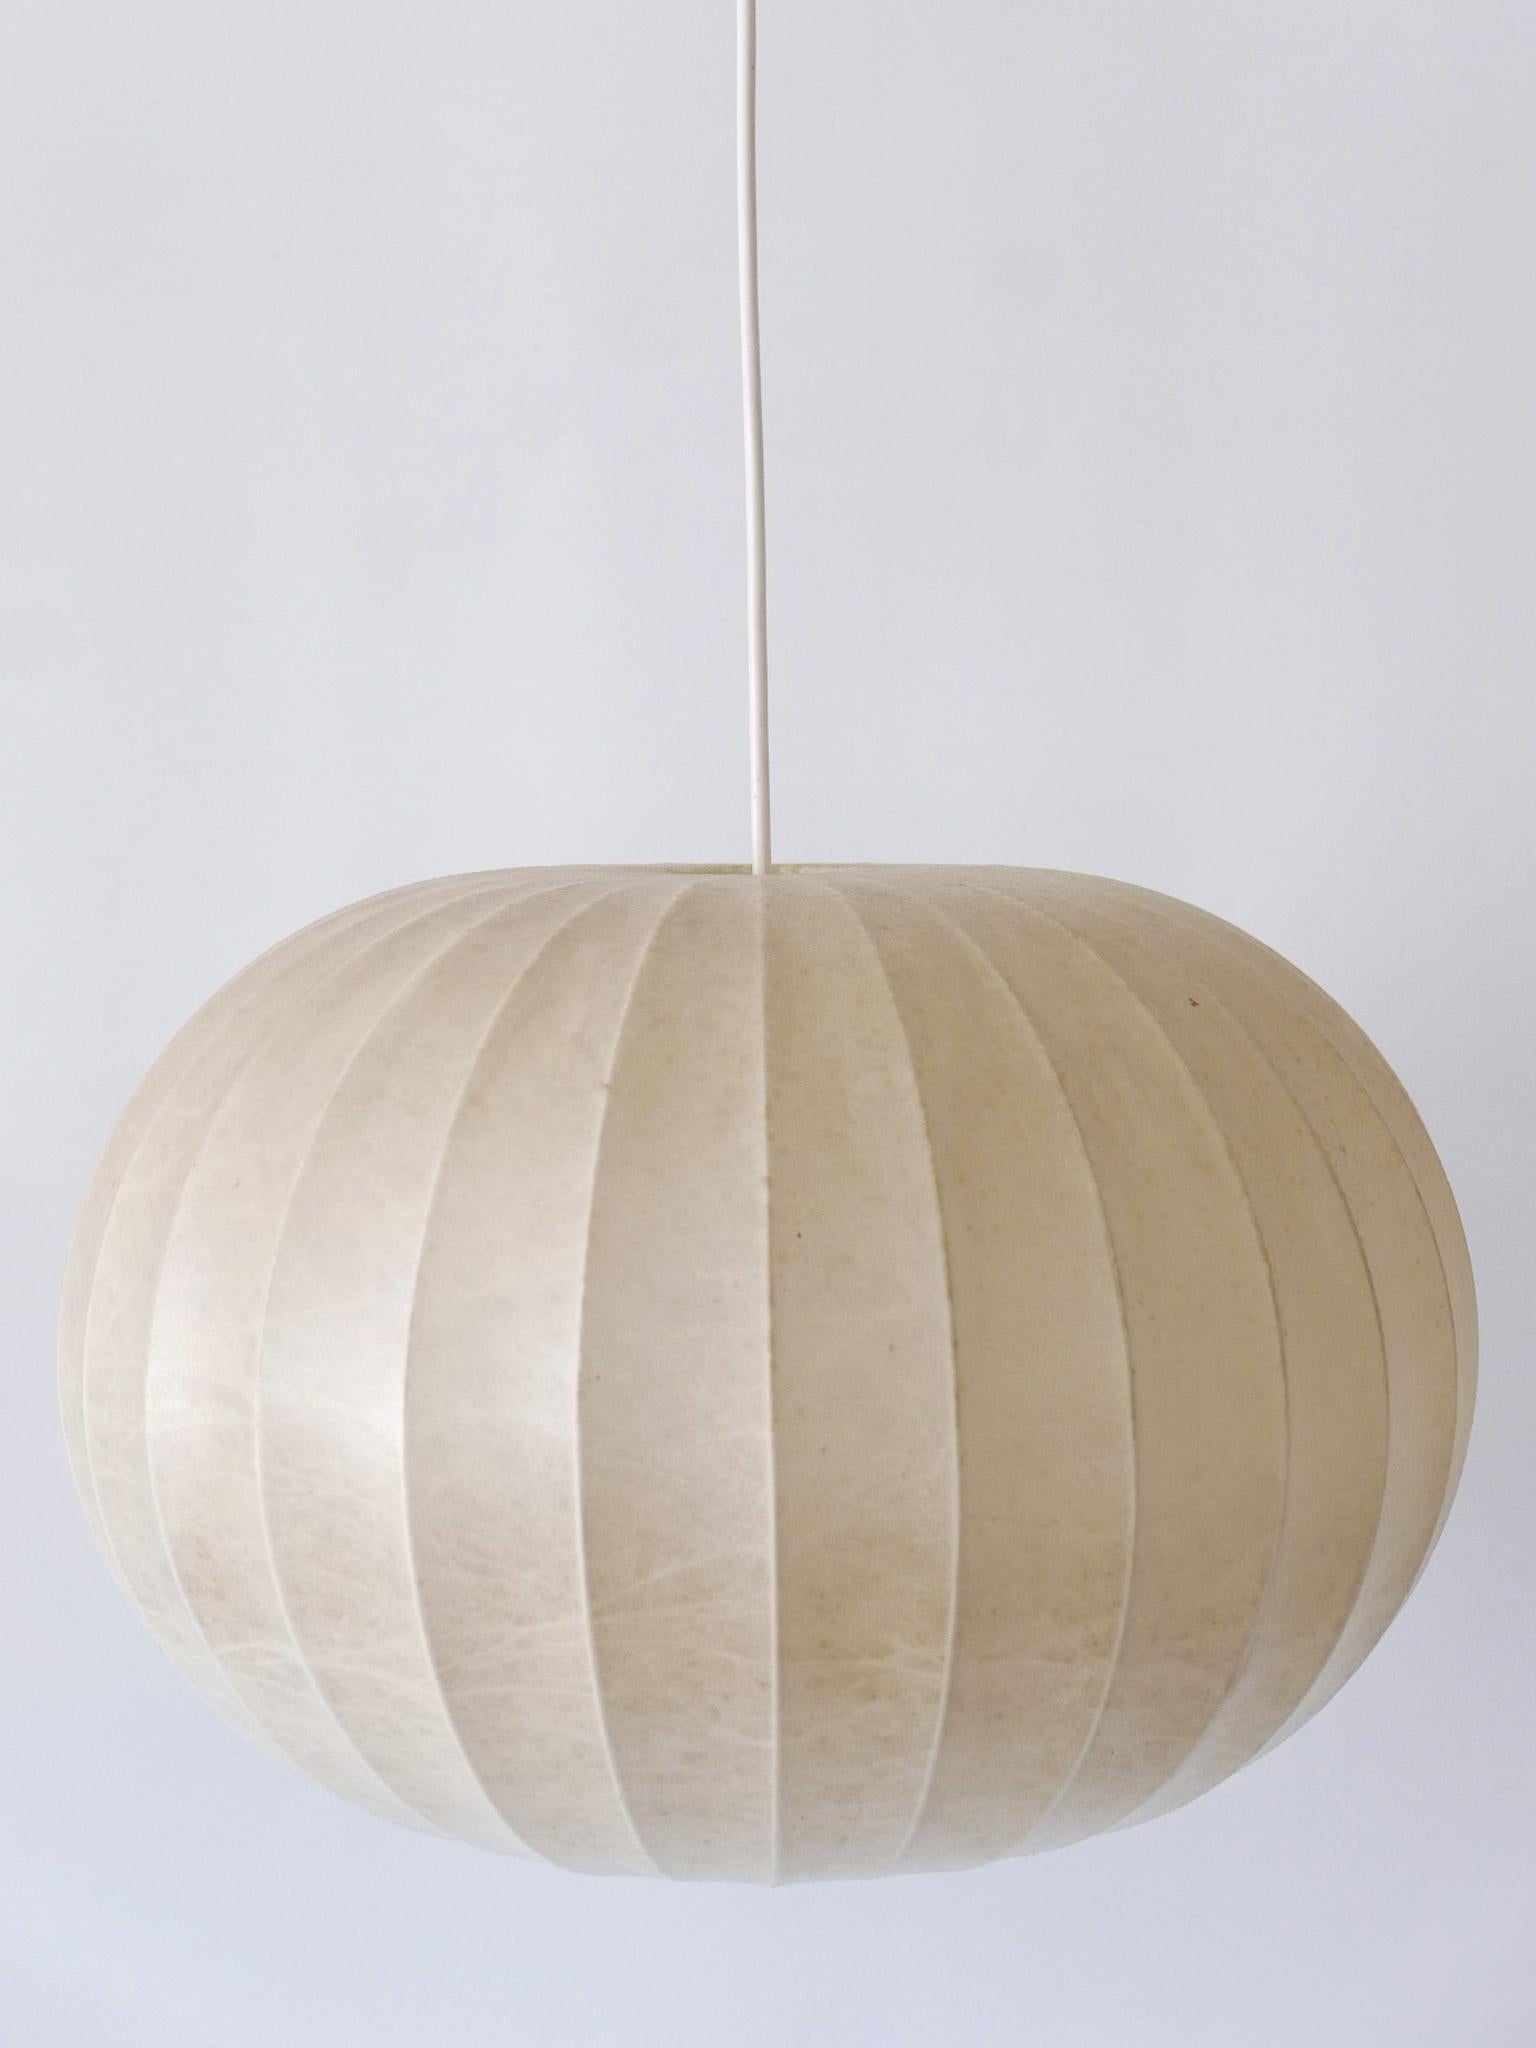 Lovely Midcentury Modern Cocoon Pendant Lamp or Hanging Light Germany 1960s In Good Condition For Sale In Munich, DE